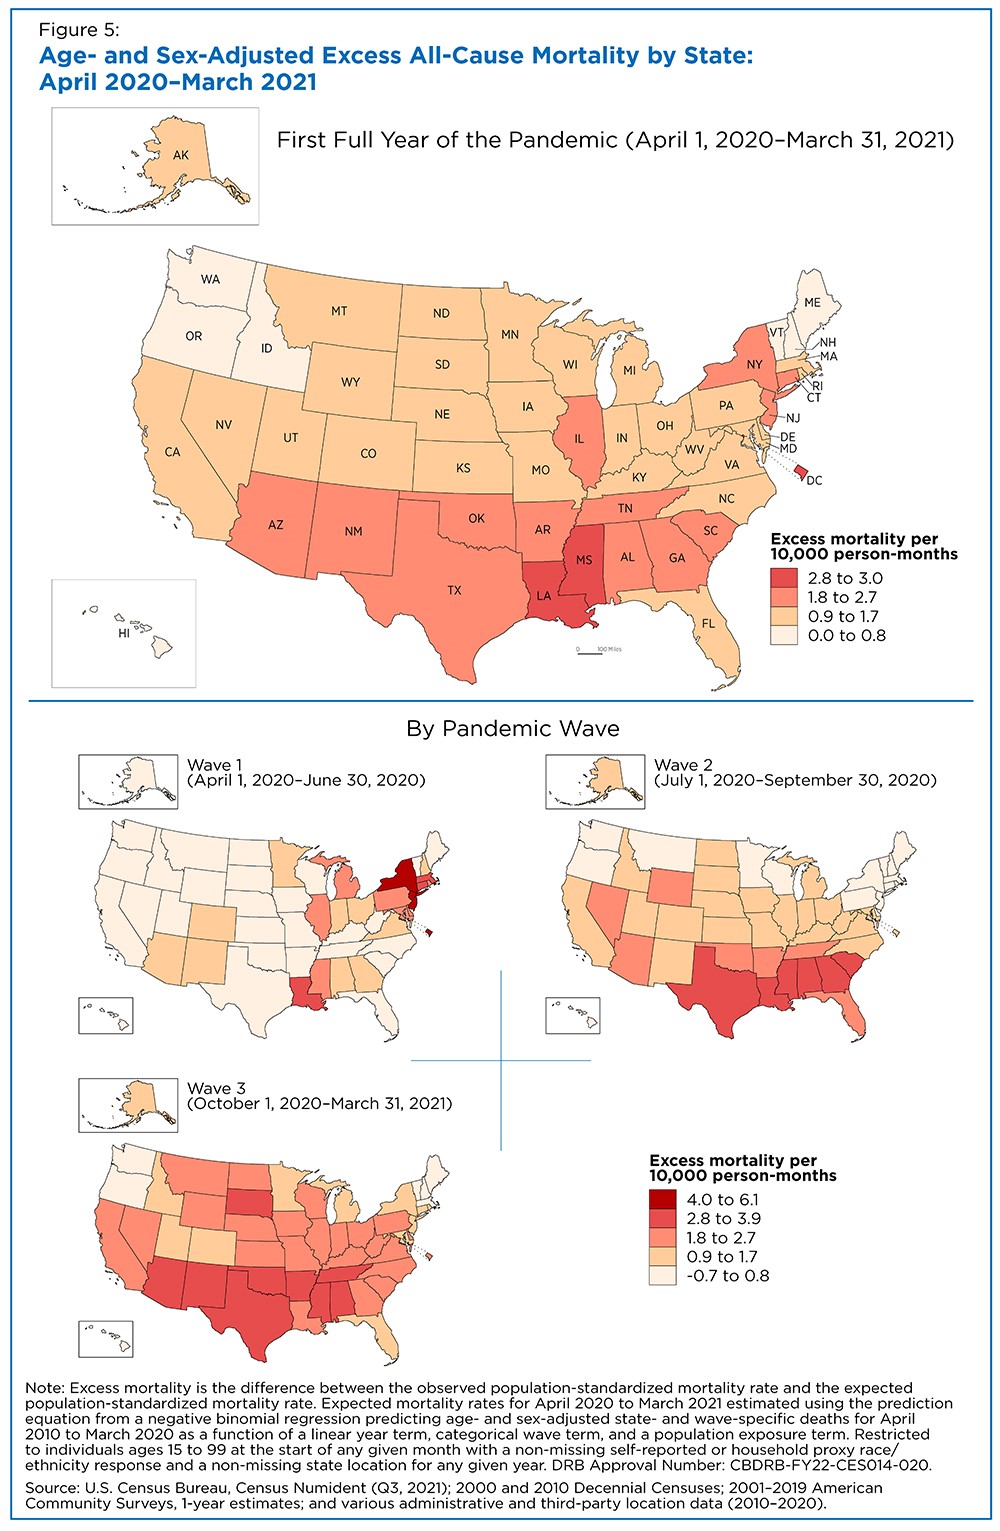 Figure 5: Age- and Sex-Adjusted Excess All-Cause Mortality by State: April 2020-March 2021 